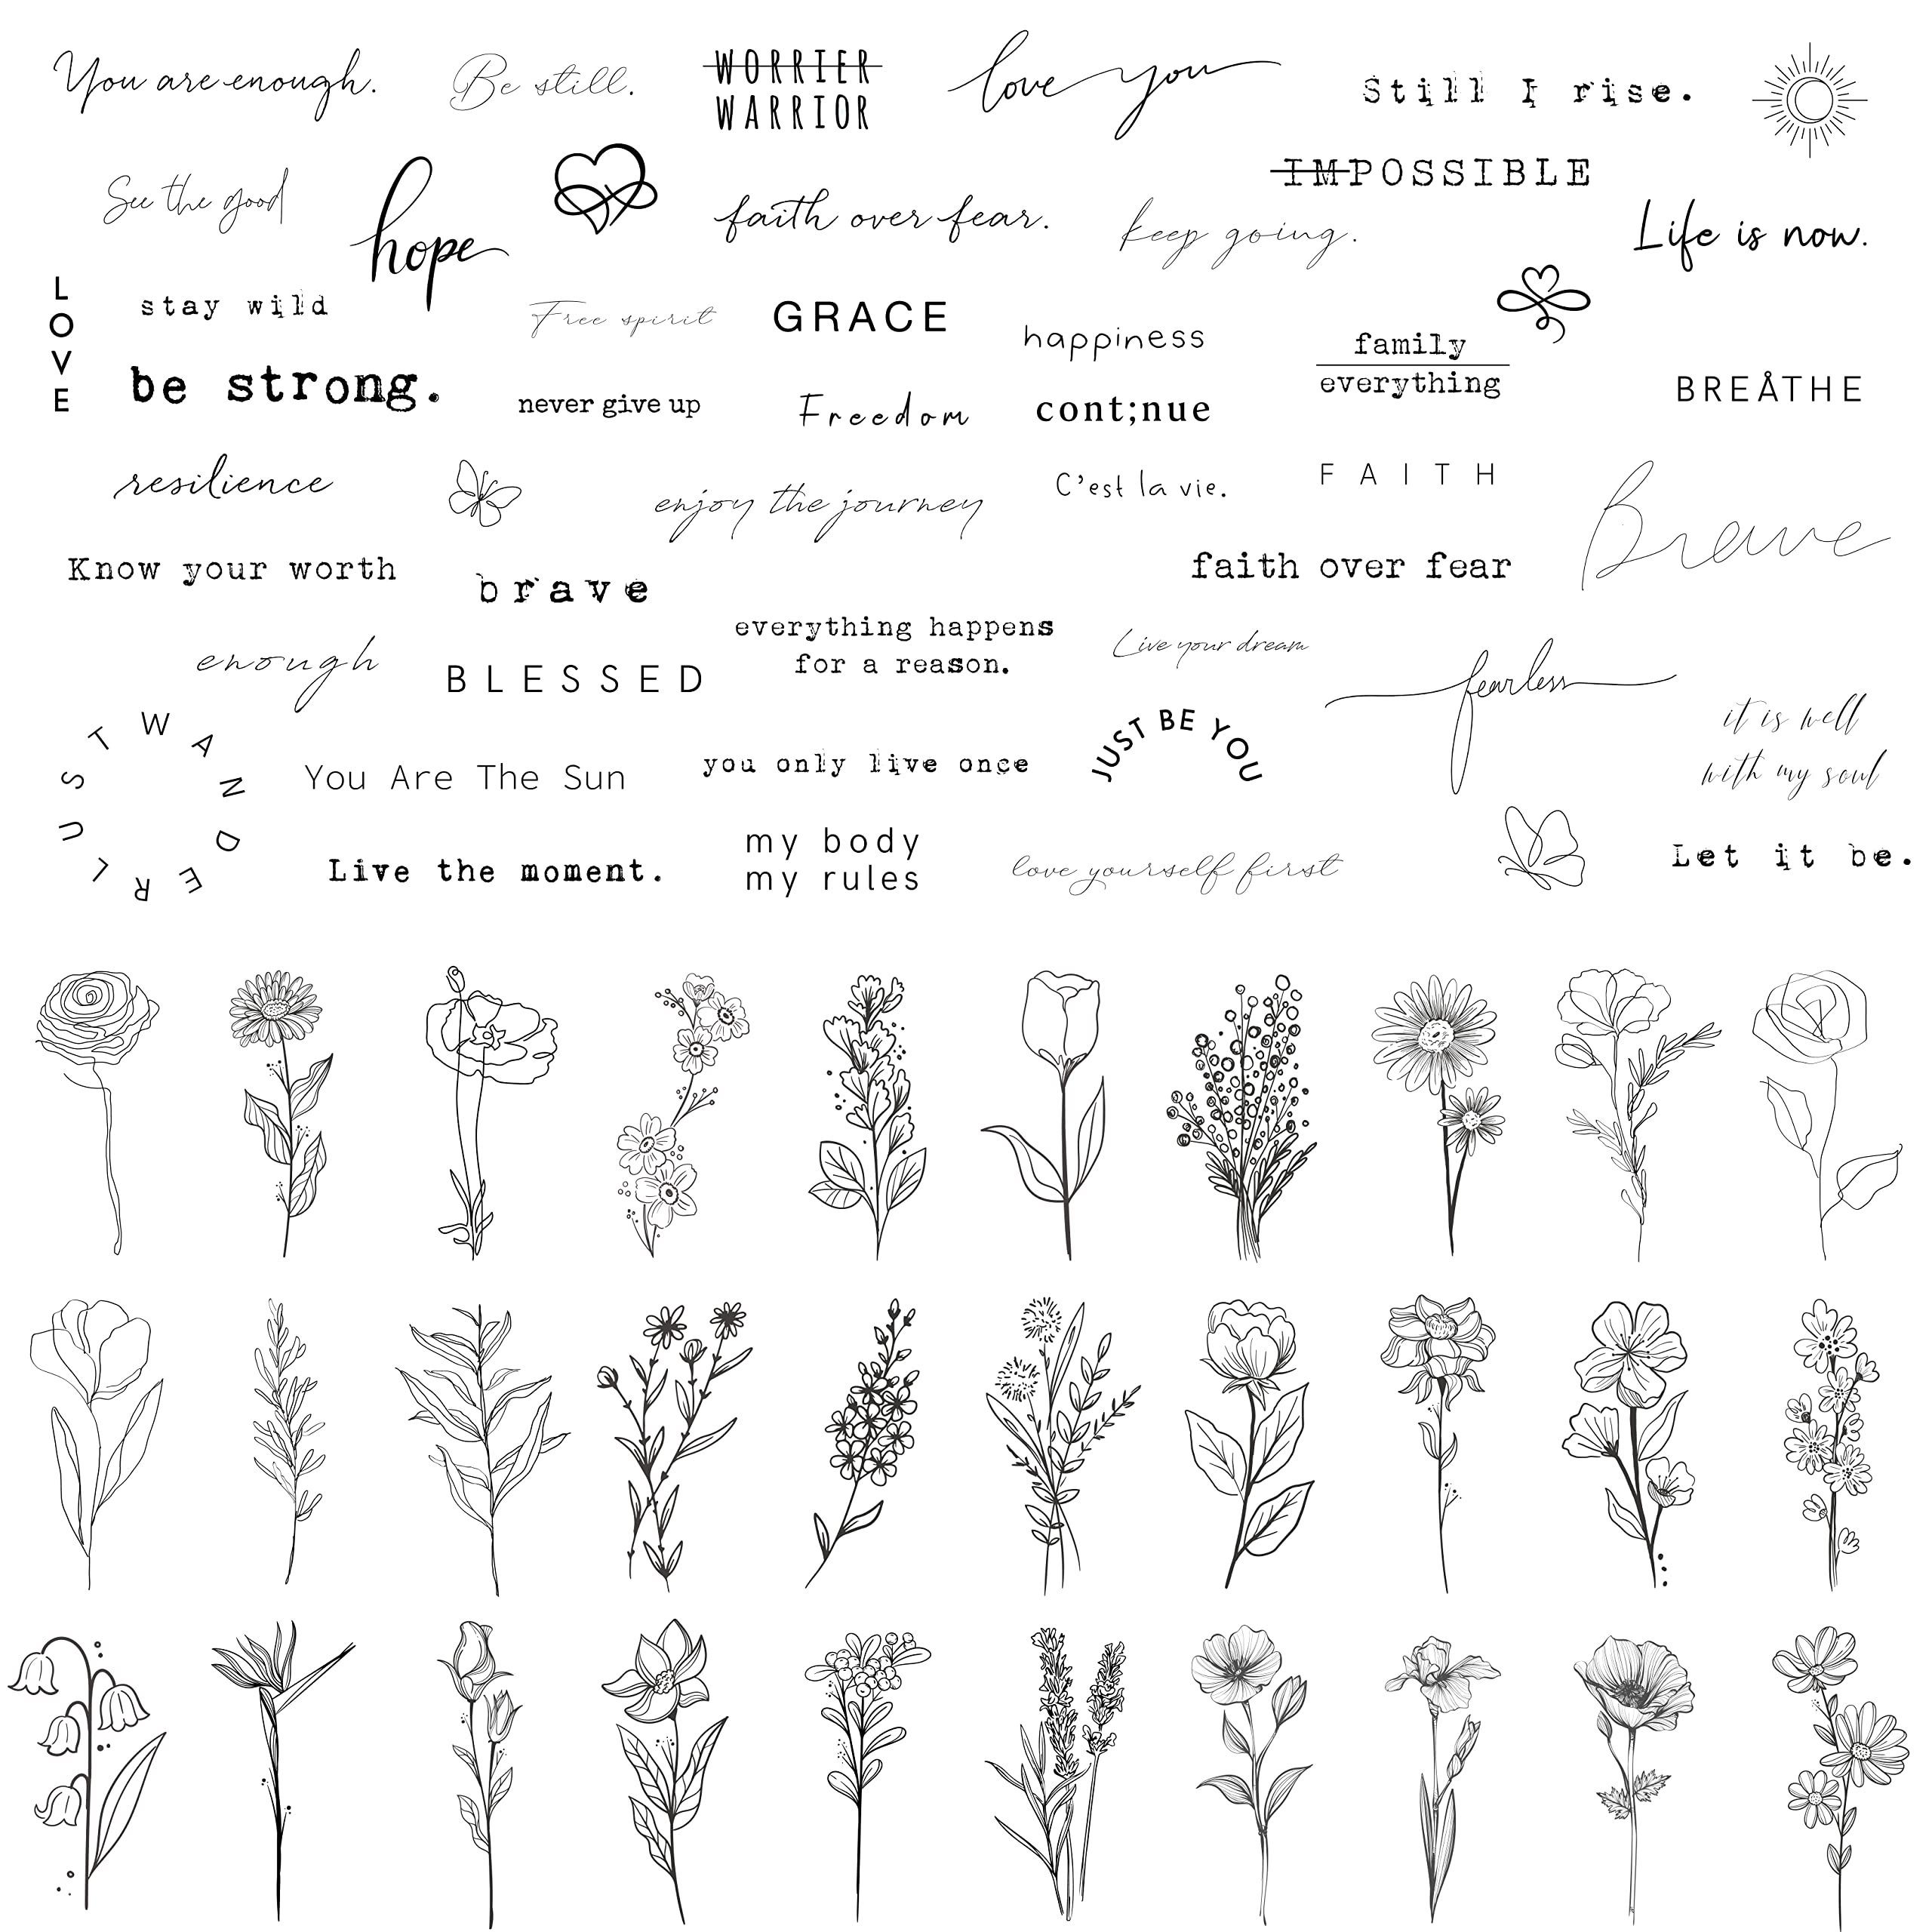 TATUWST Realistic Temporary Tattoos - 60 Sheets Tiny Small Removable Tattoos, 30 Pcs Inspirational Quotes Words Tattoos, 30 Pcs Wild Flower Ink Line Botanical Floral Leaf Tattoo Stickers for Women